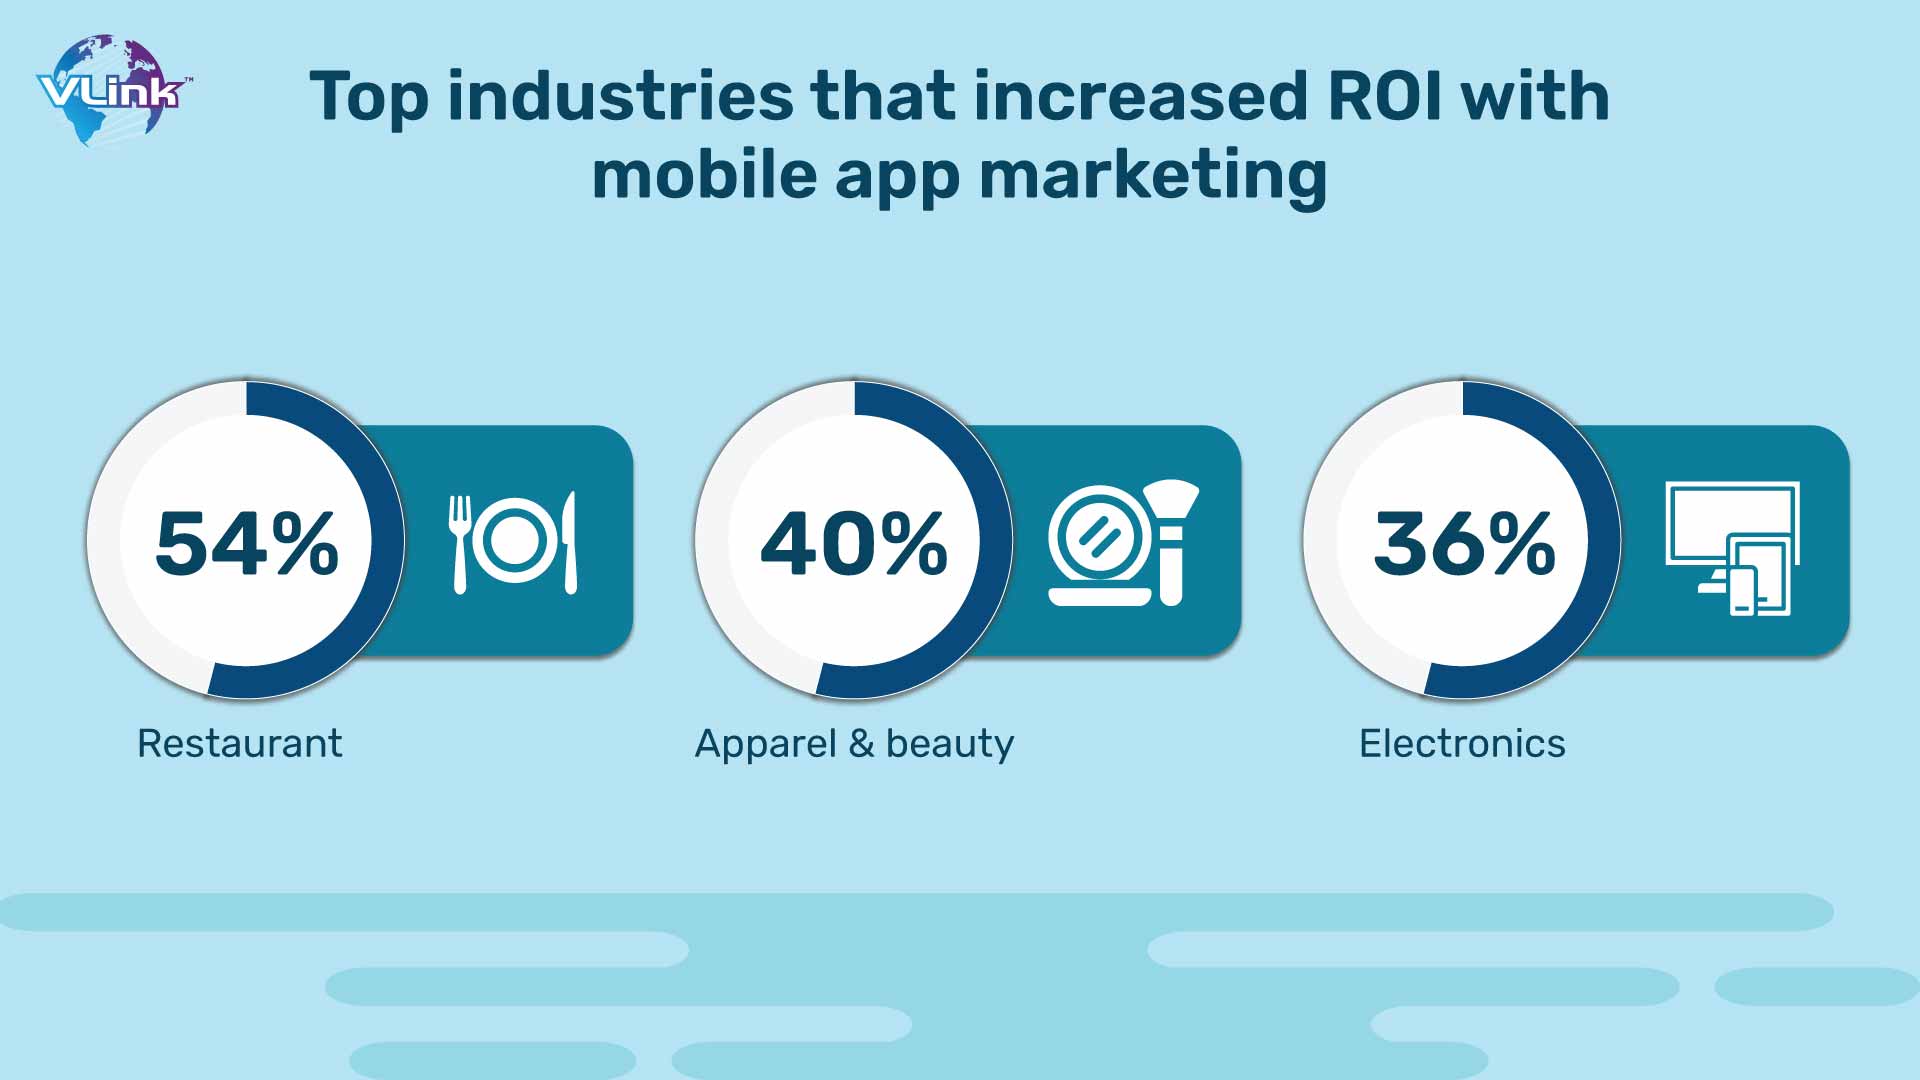 Increased Sales and ROI on mobile app